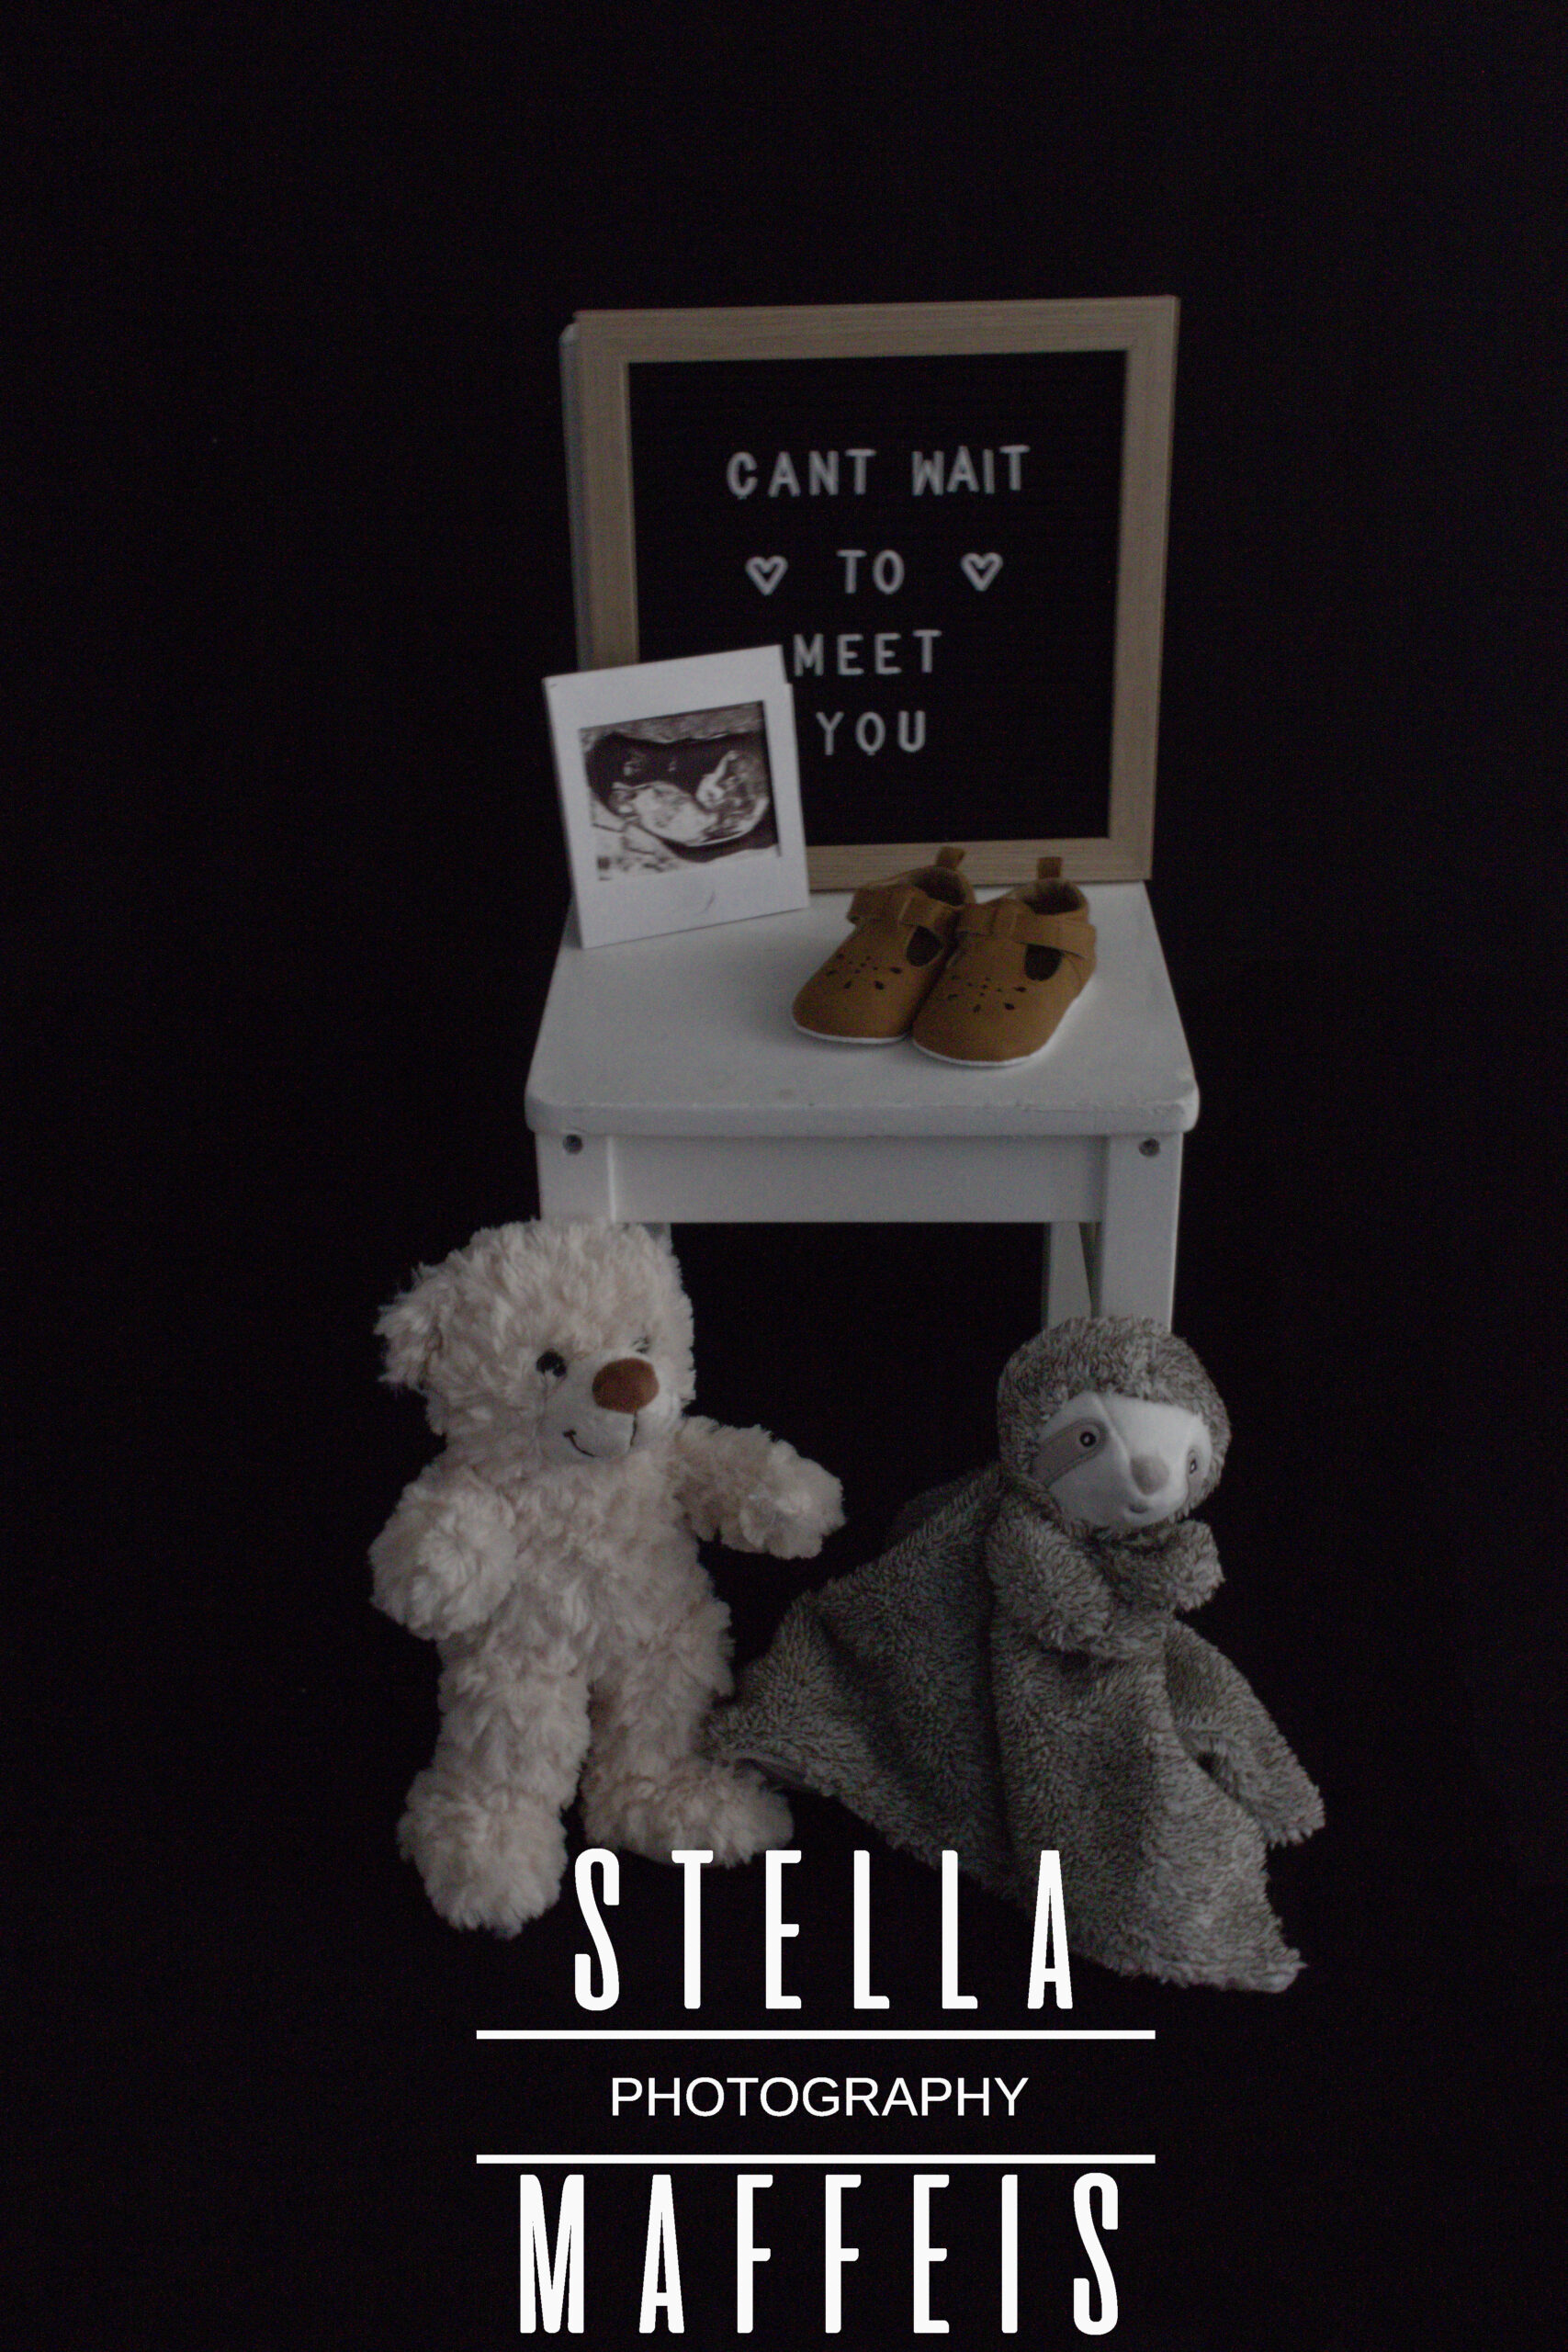 Photography shoot props, a little white chair with two teddys, a pair of little baby shoes, a sonogram image and a sign which reads "Can't wait to meet you".